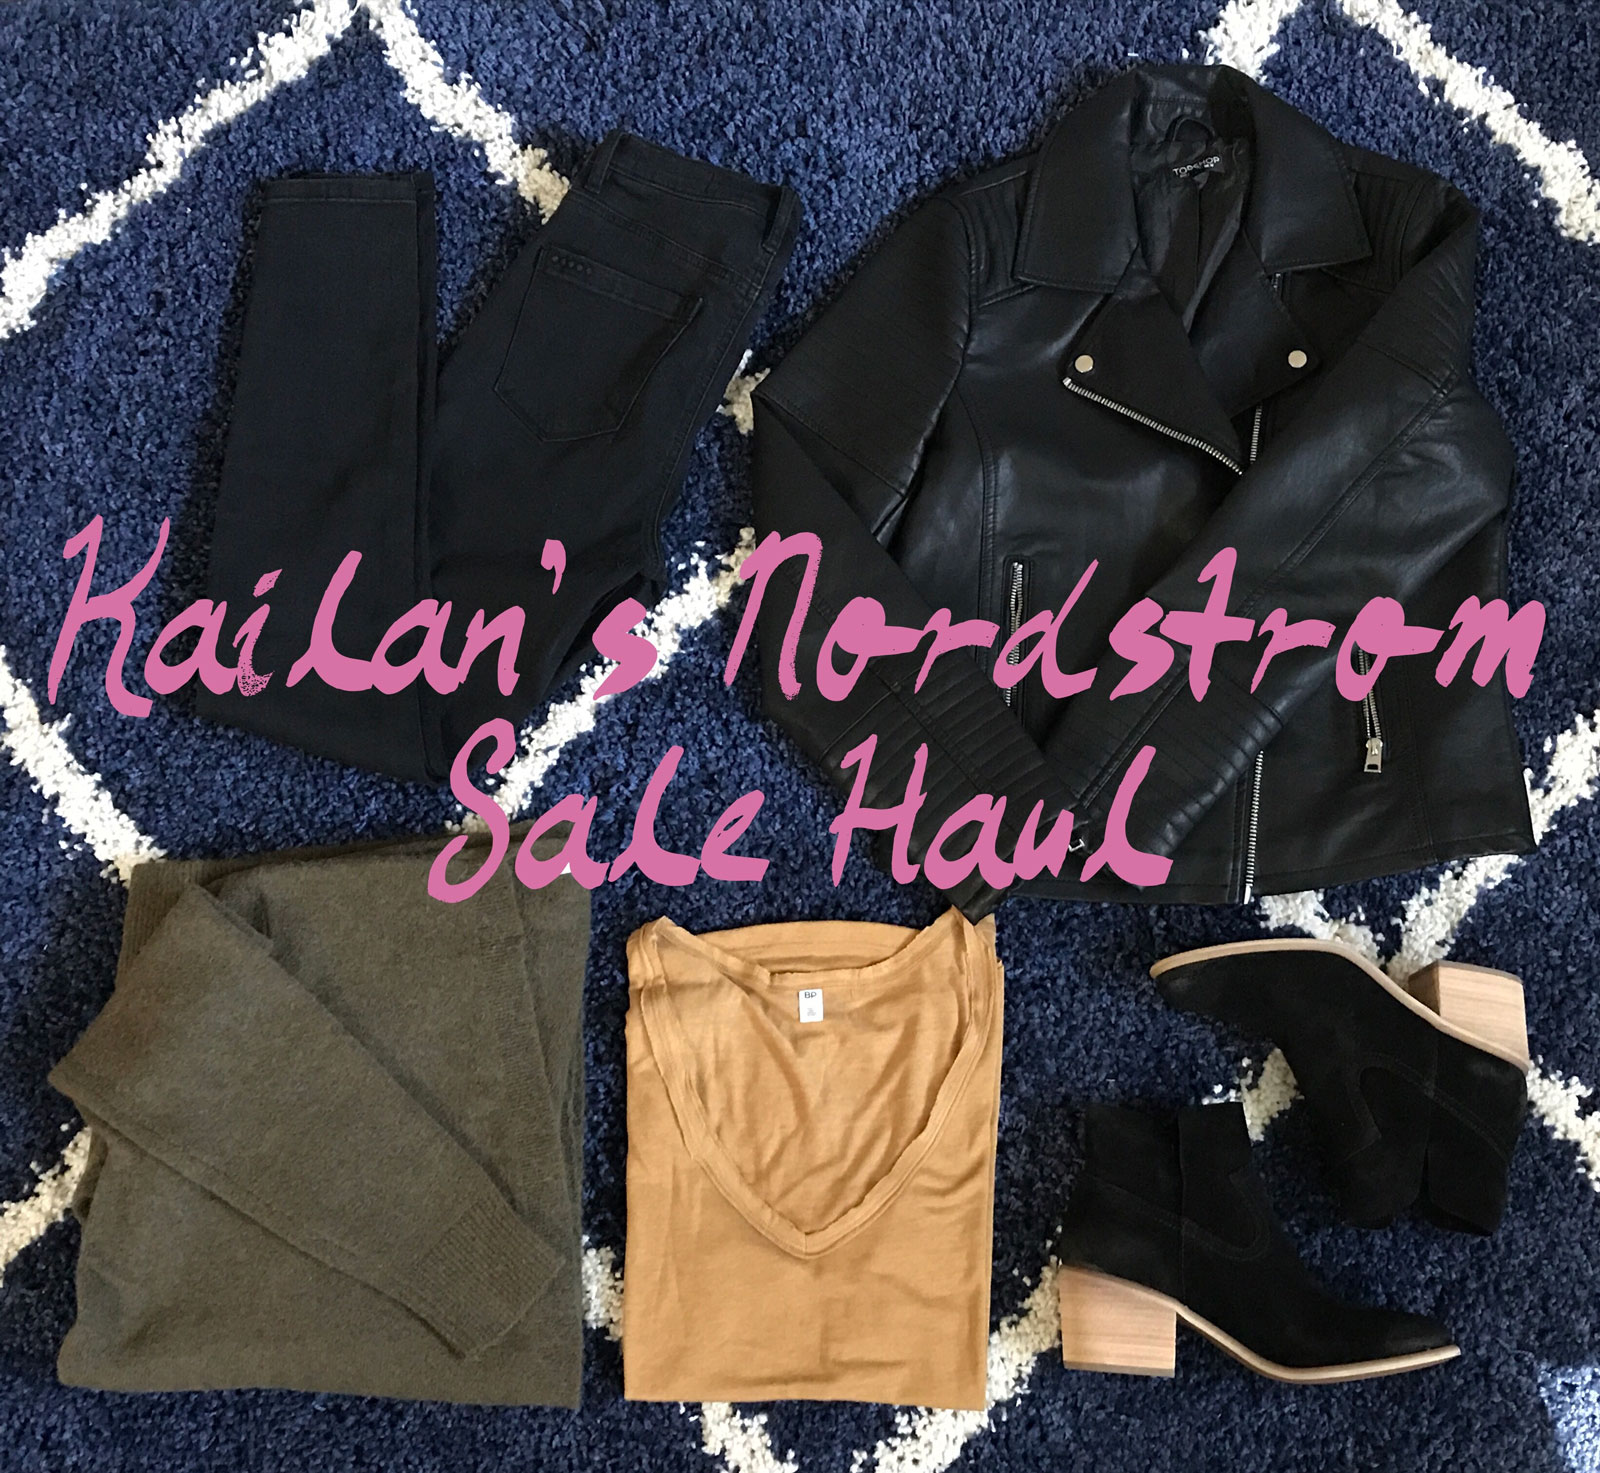 Kailan's 2018 Nordstrom Sale Haul Try-On